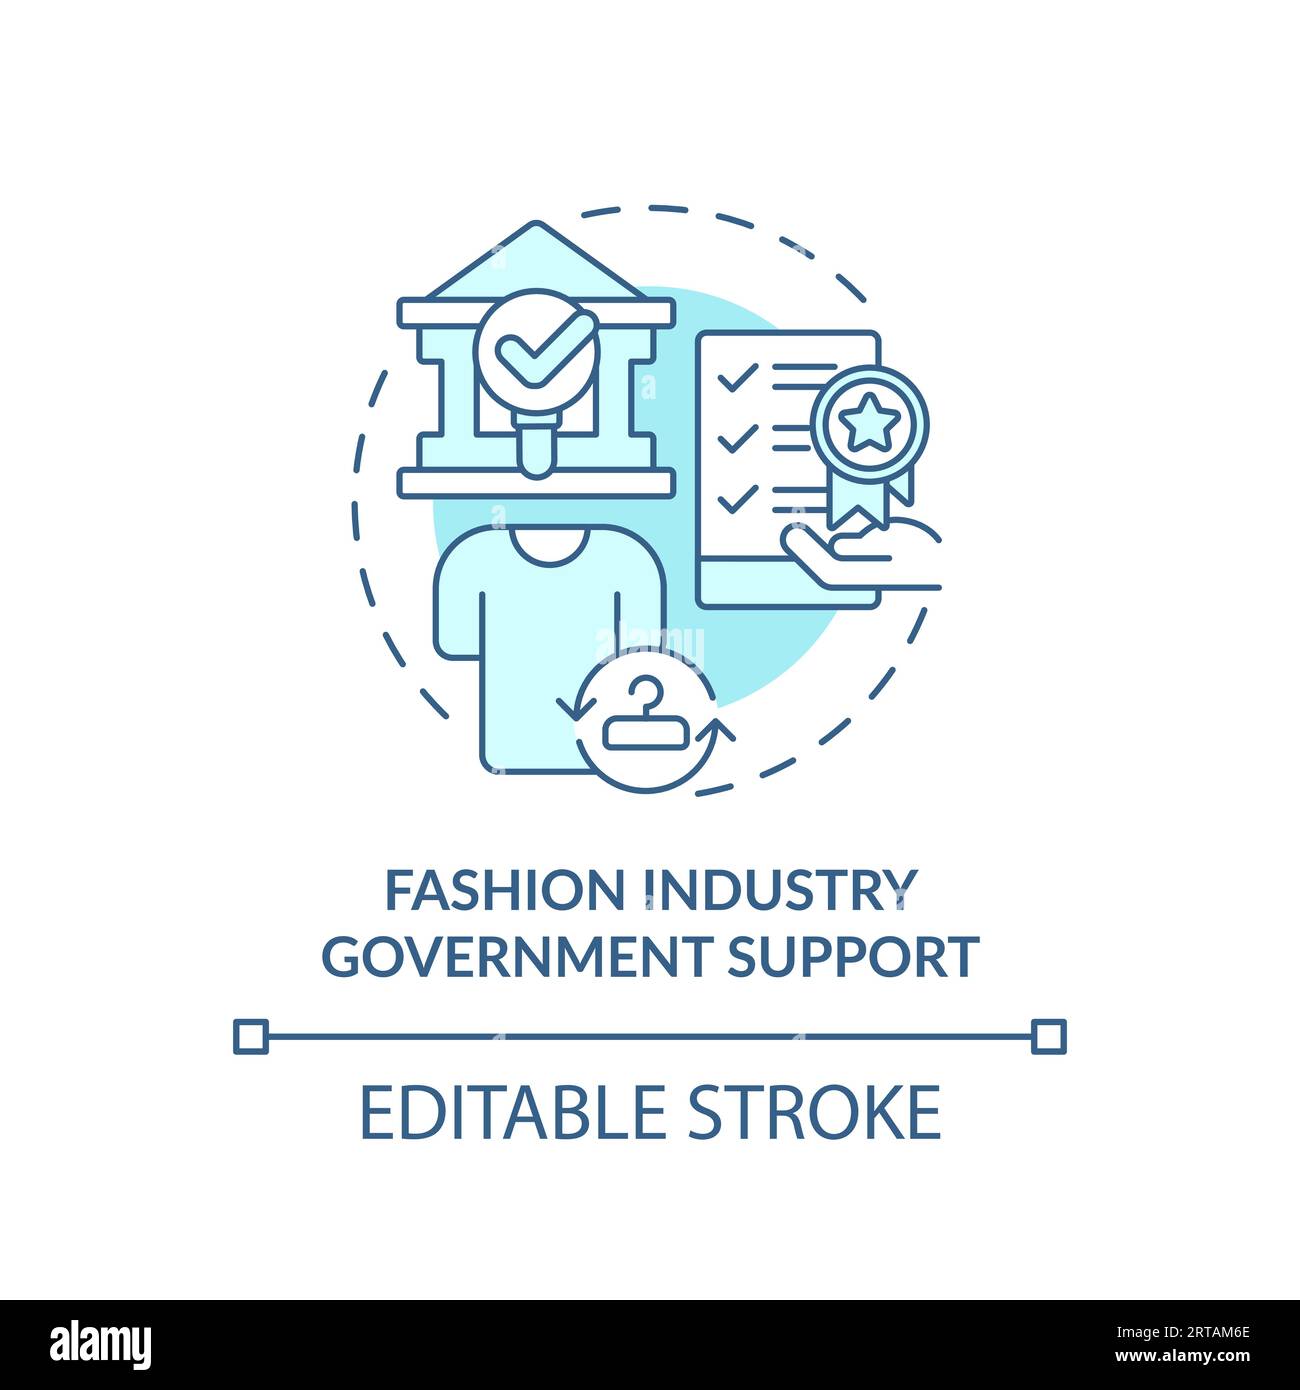 2D line icon fashion industry government support concept Stock Vector